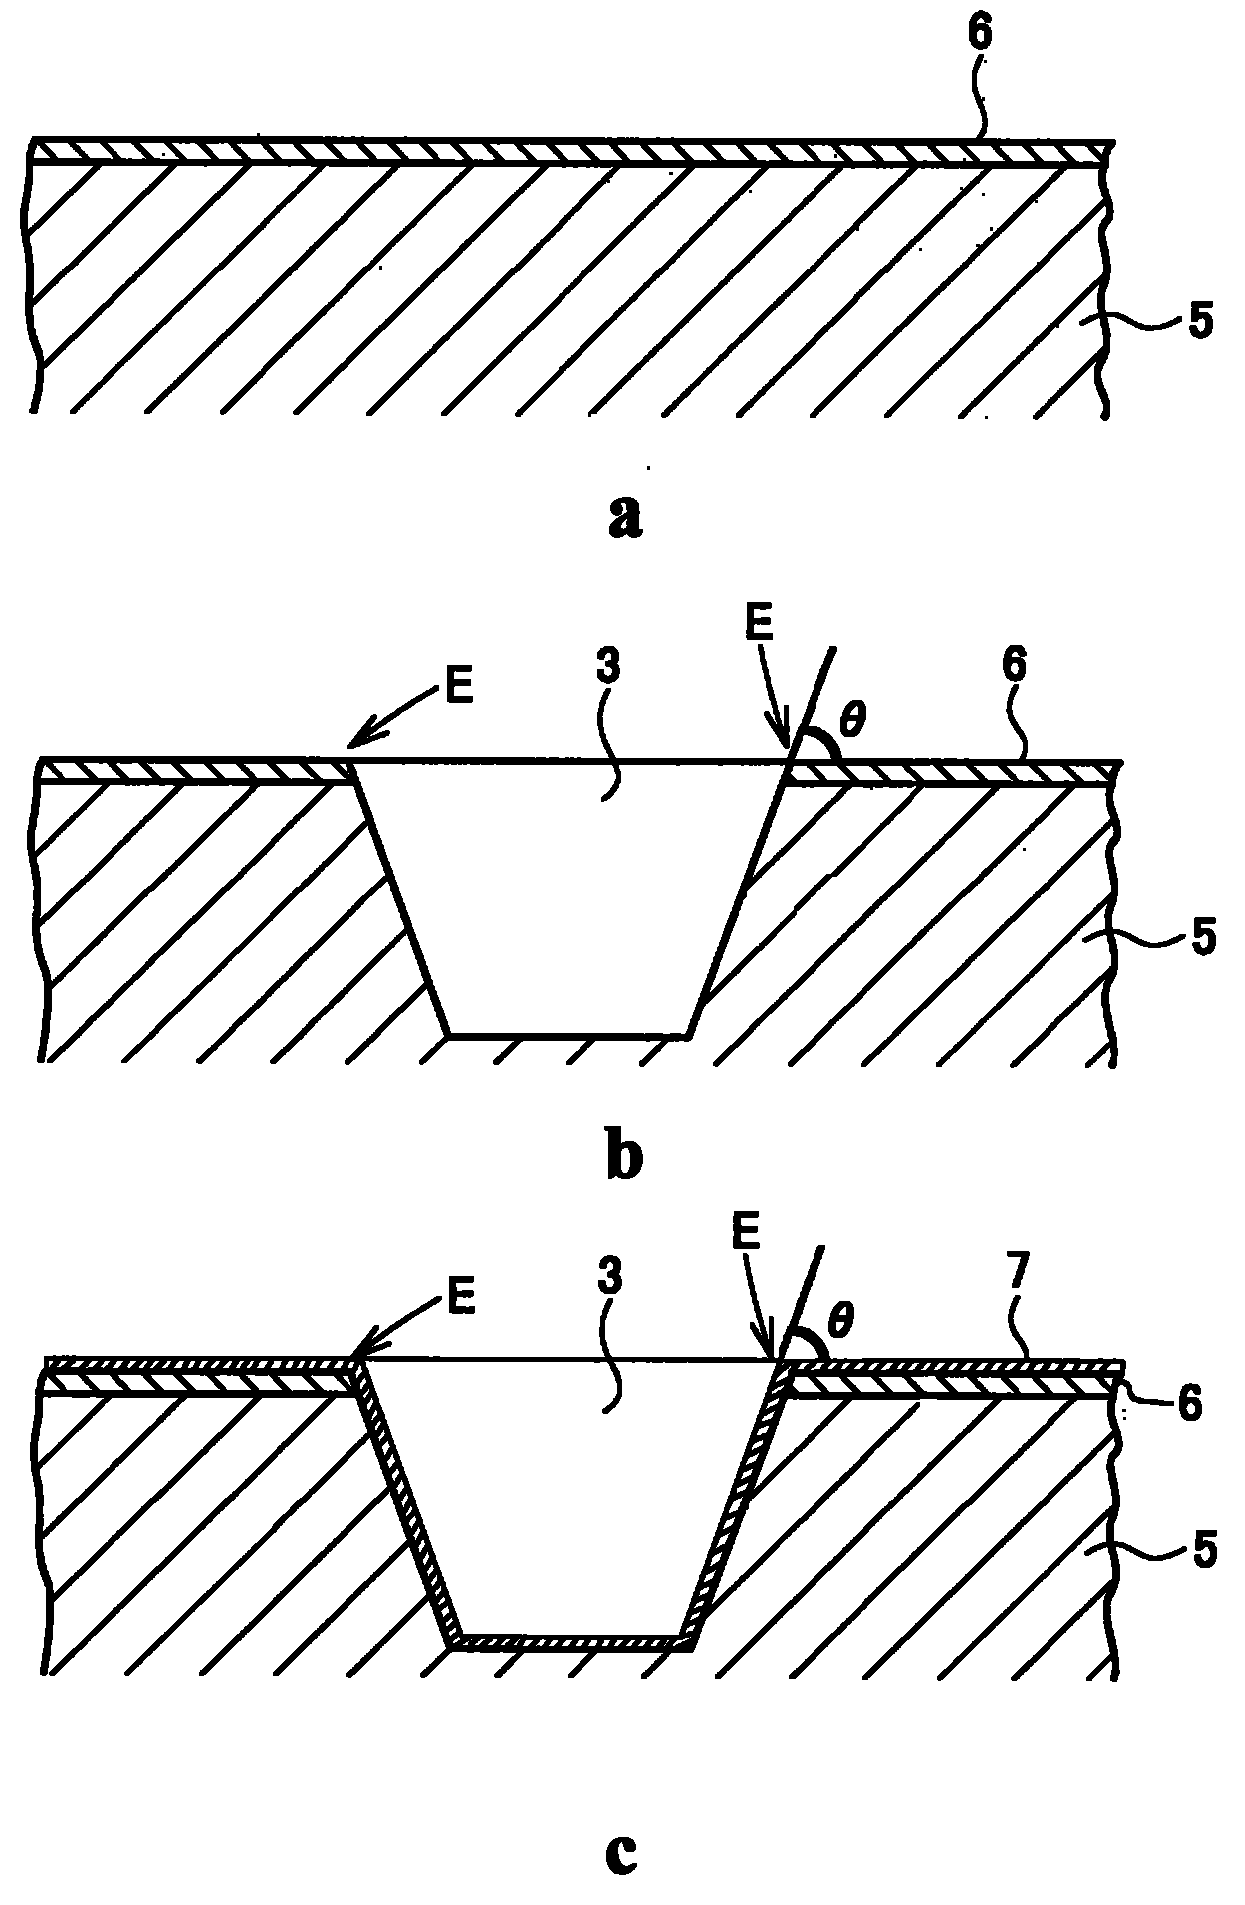 Golf club head and method of manufacturing the same